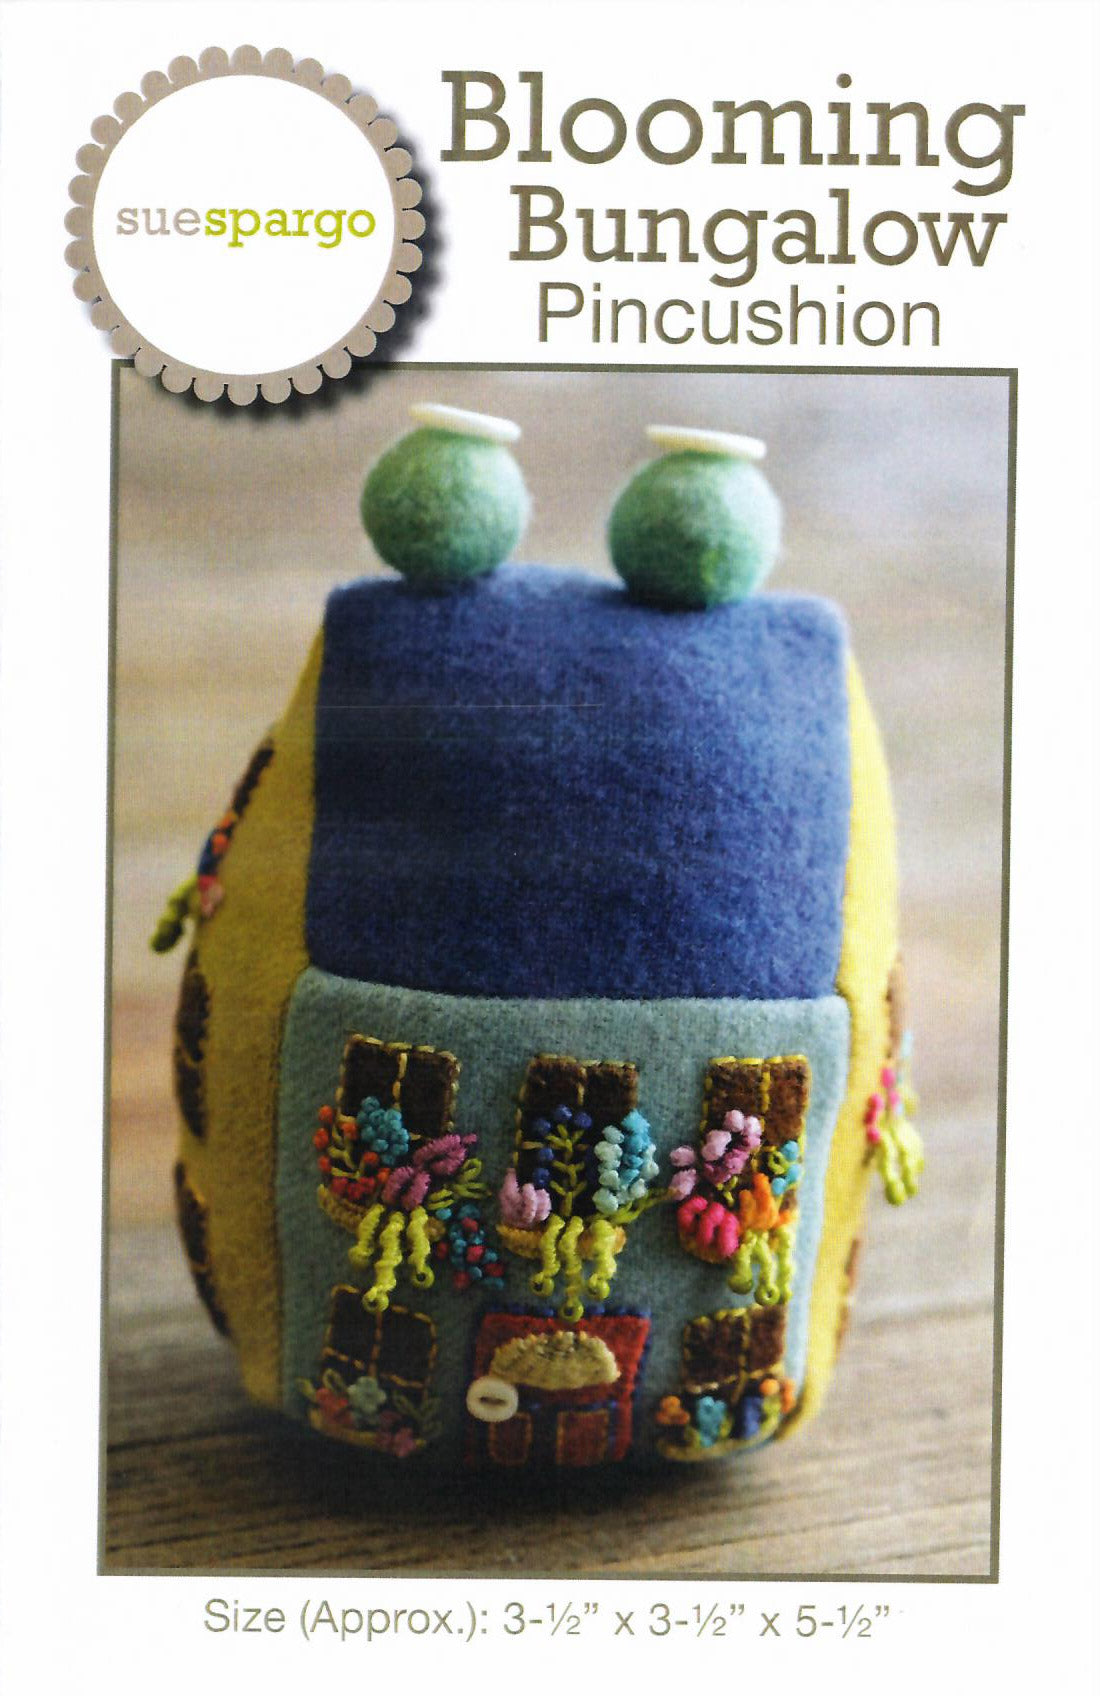 Blooming Bungalow Pincushion - Applique, Embroidery, and Sewing Pattern by Sue Spargo of Folk Art Quilts